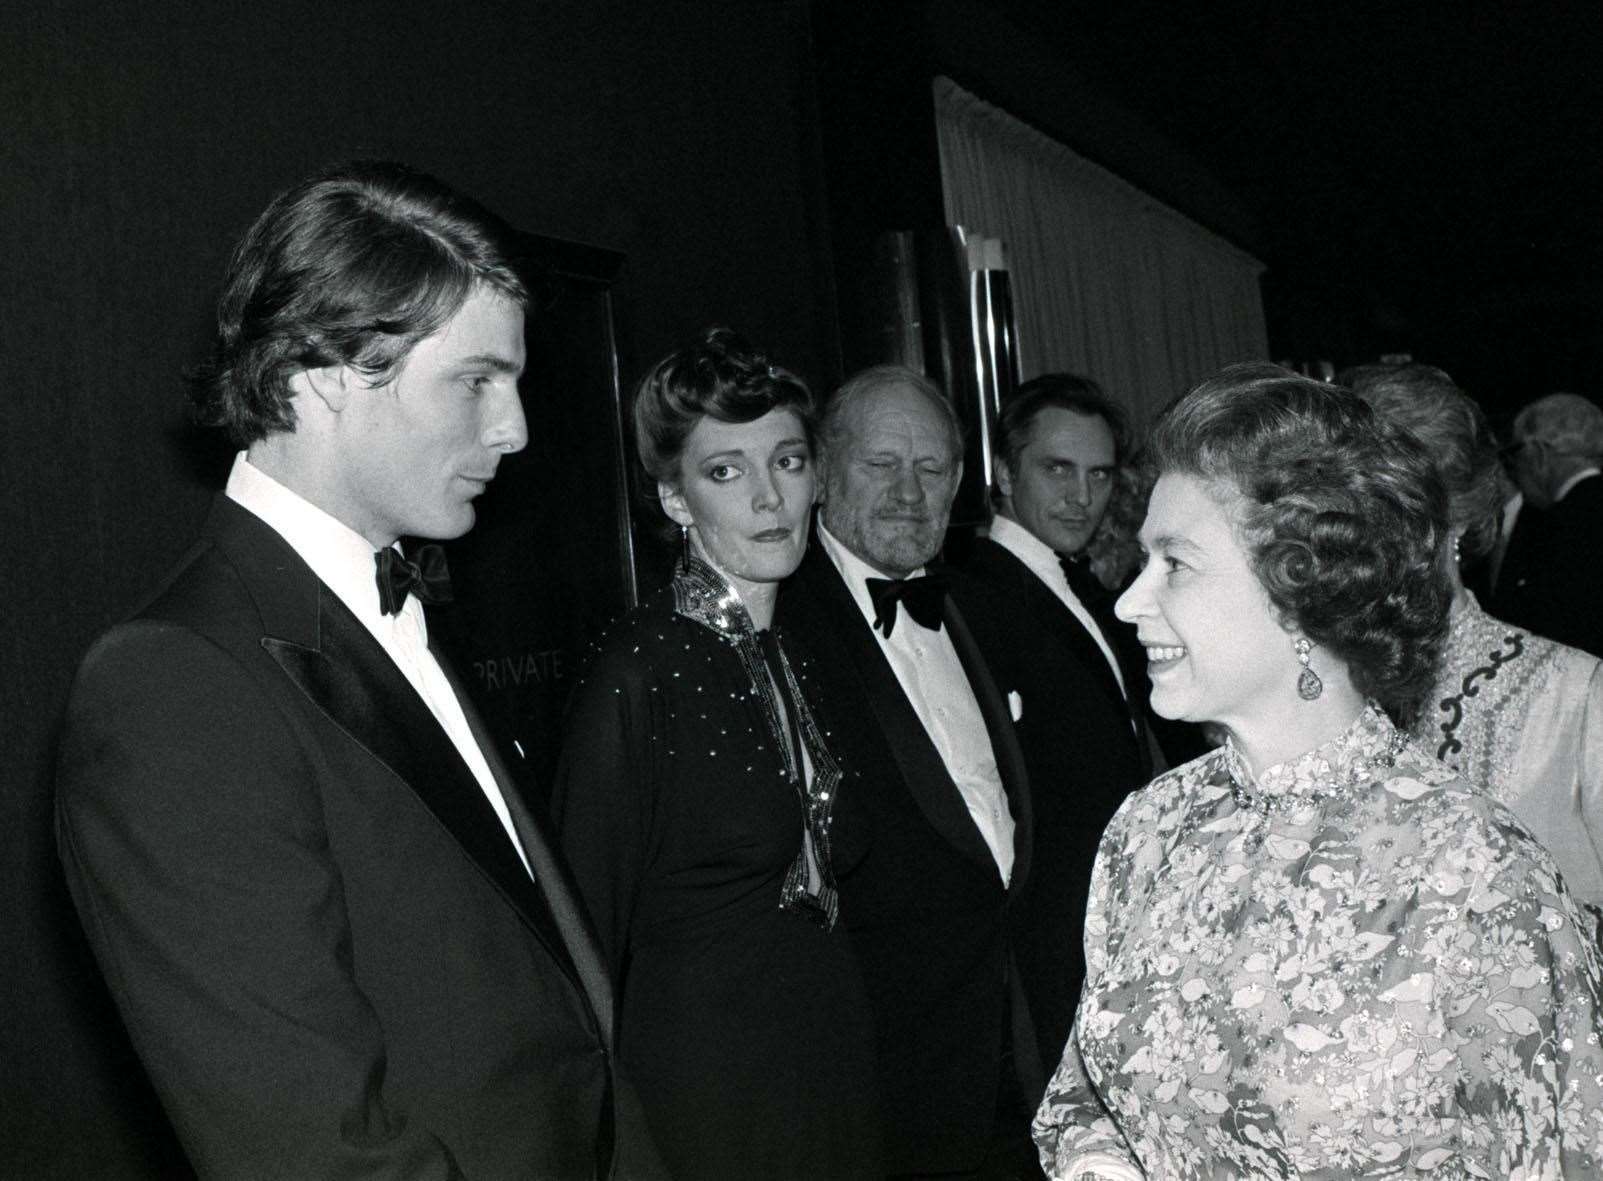 The Queen, who was attending the European royal charity premiere of Superman, meets Christopher Reeve at the Empire Theatre in Leicester Square in 1978 (PA)